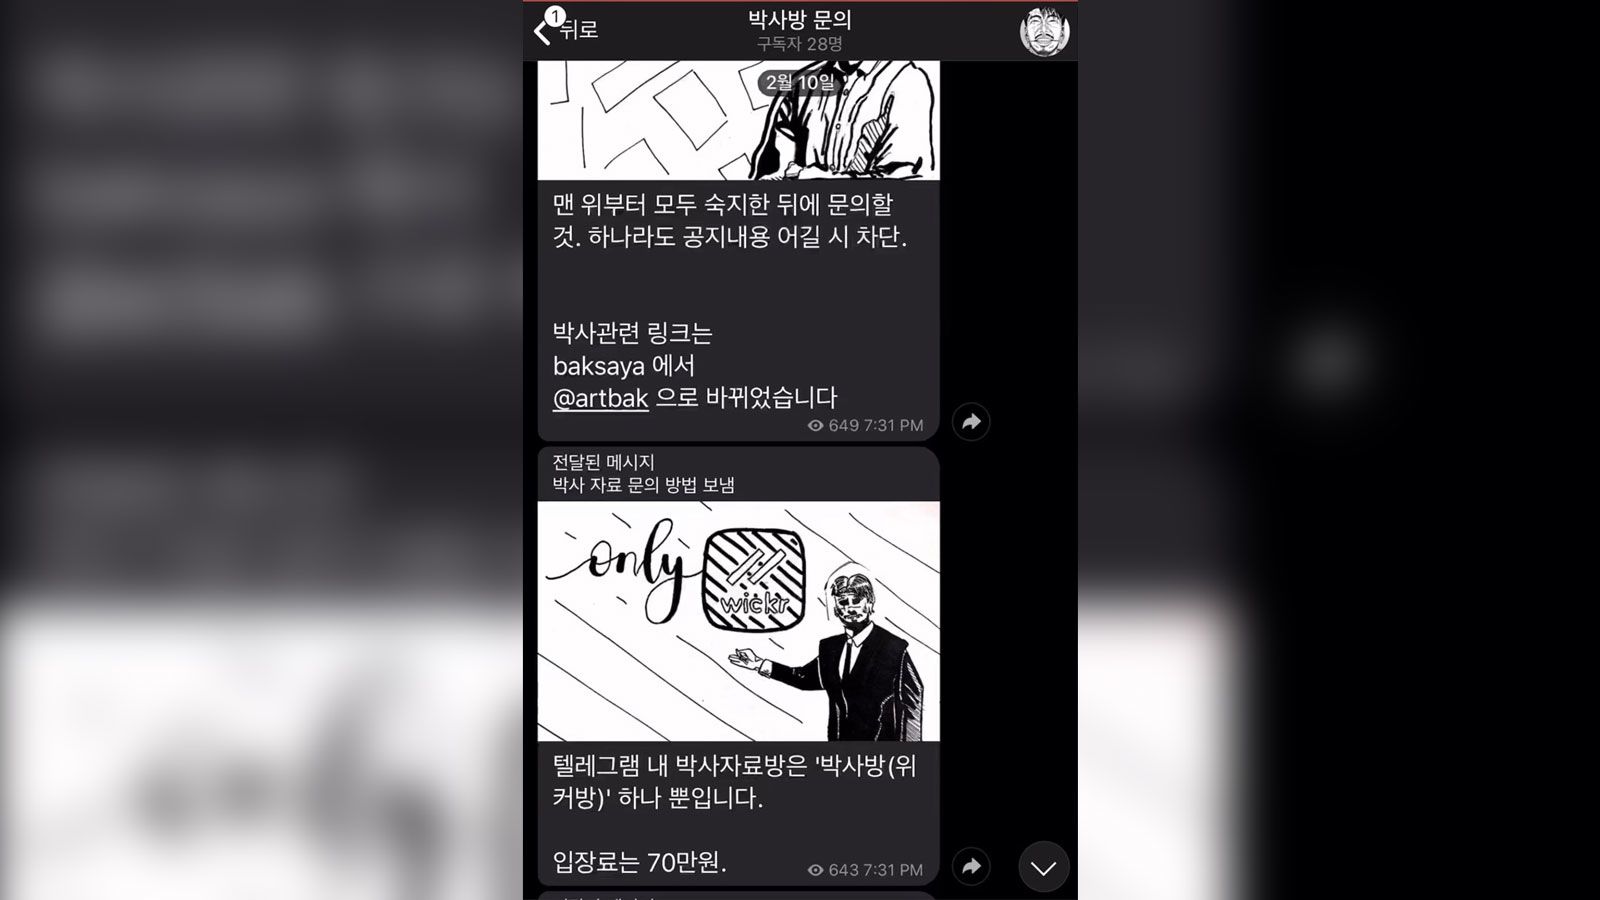 Virtual Sex Blackmail - Dozens of young women in South Korea were allegedly forced into sexual  slavery on an encrypted messaging app | CNN